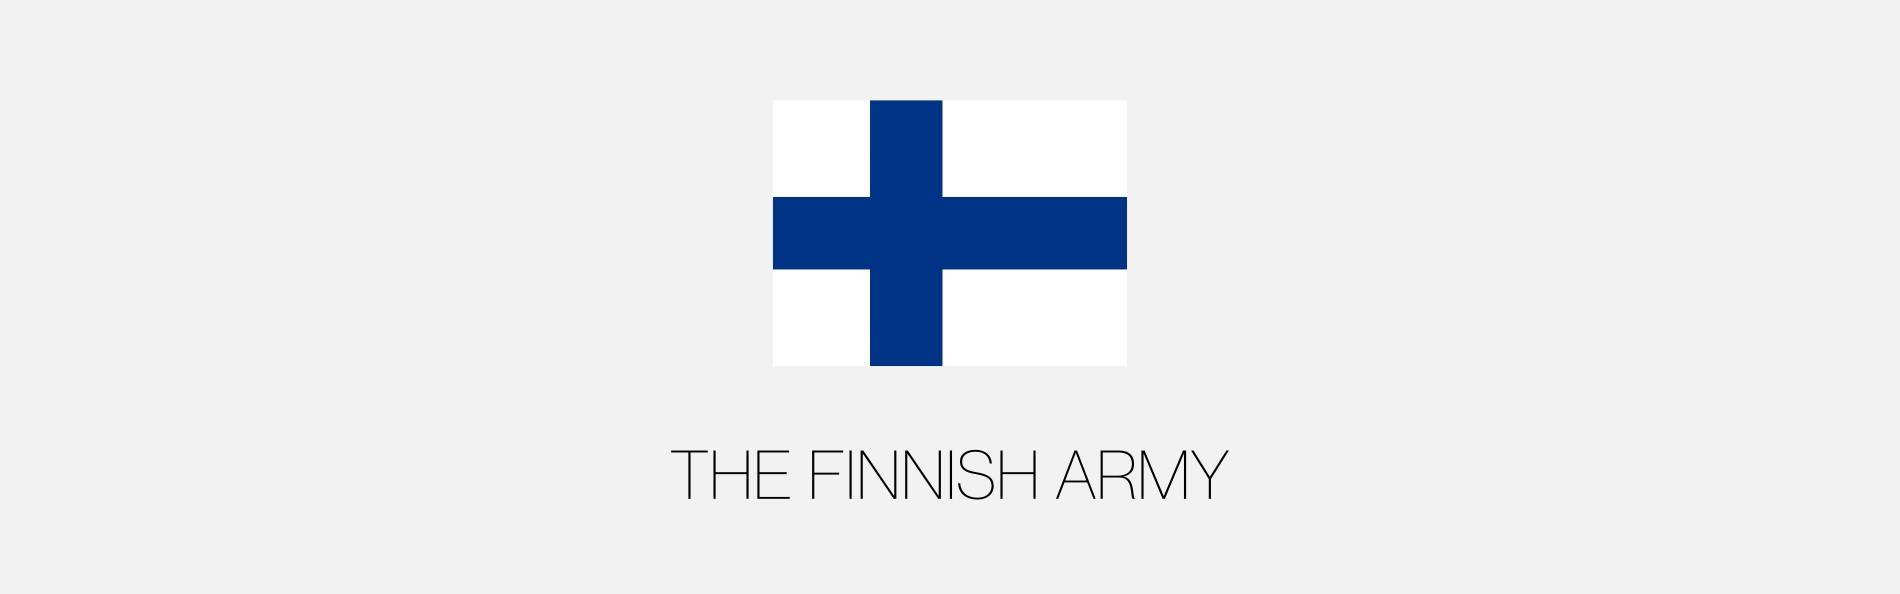 Finnish army x Parrot Drones